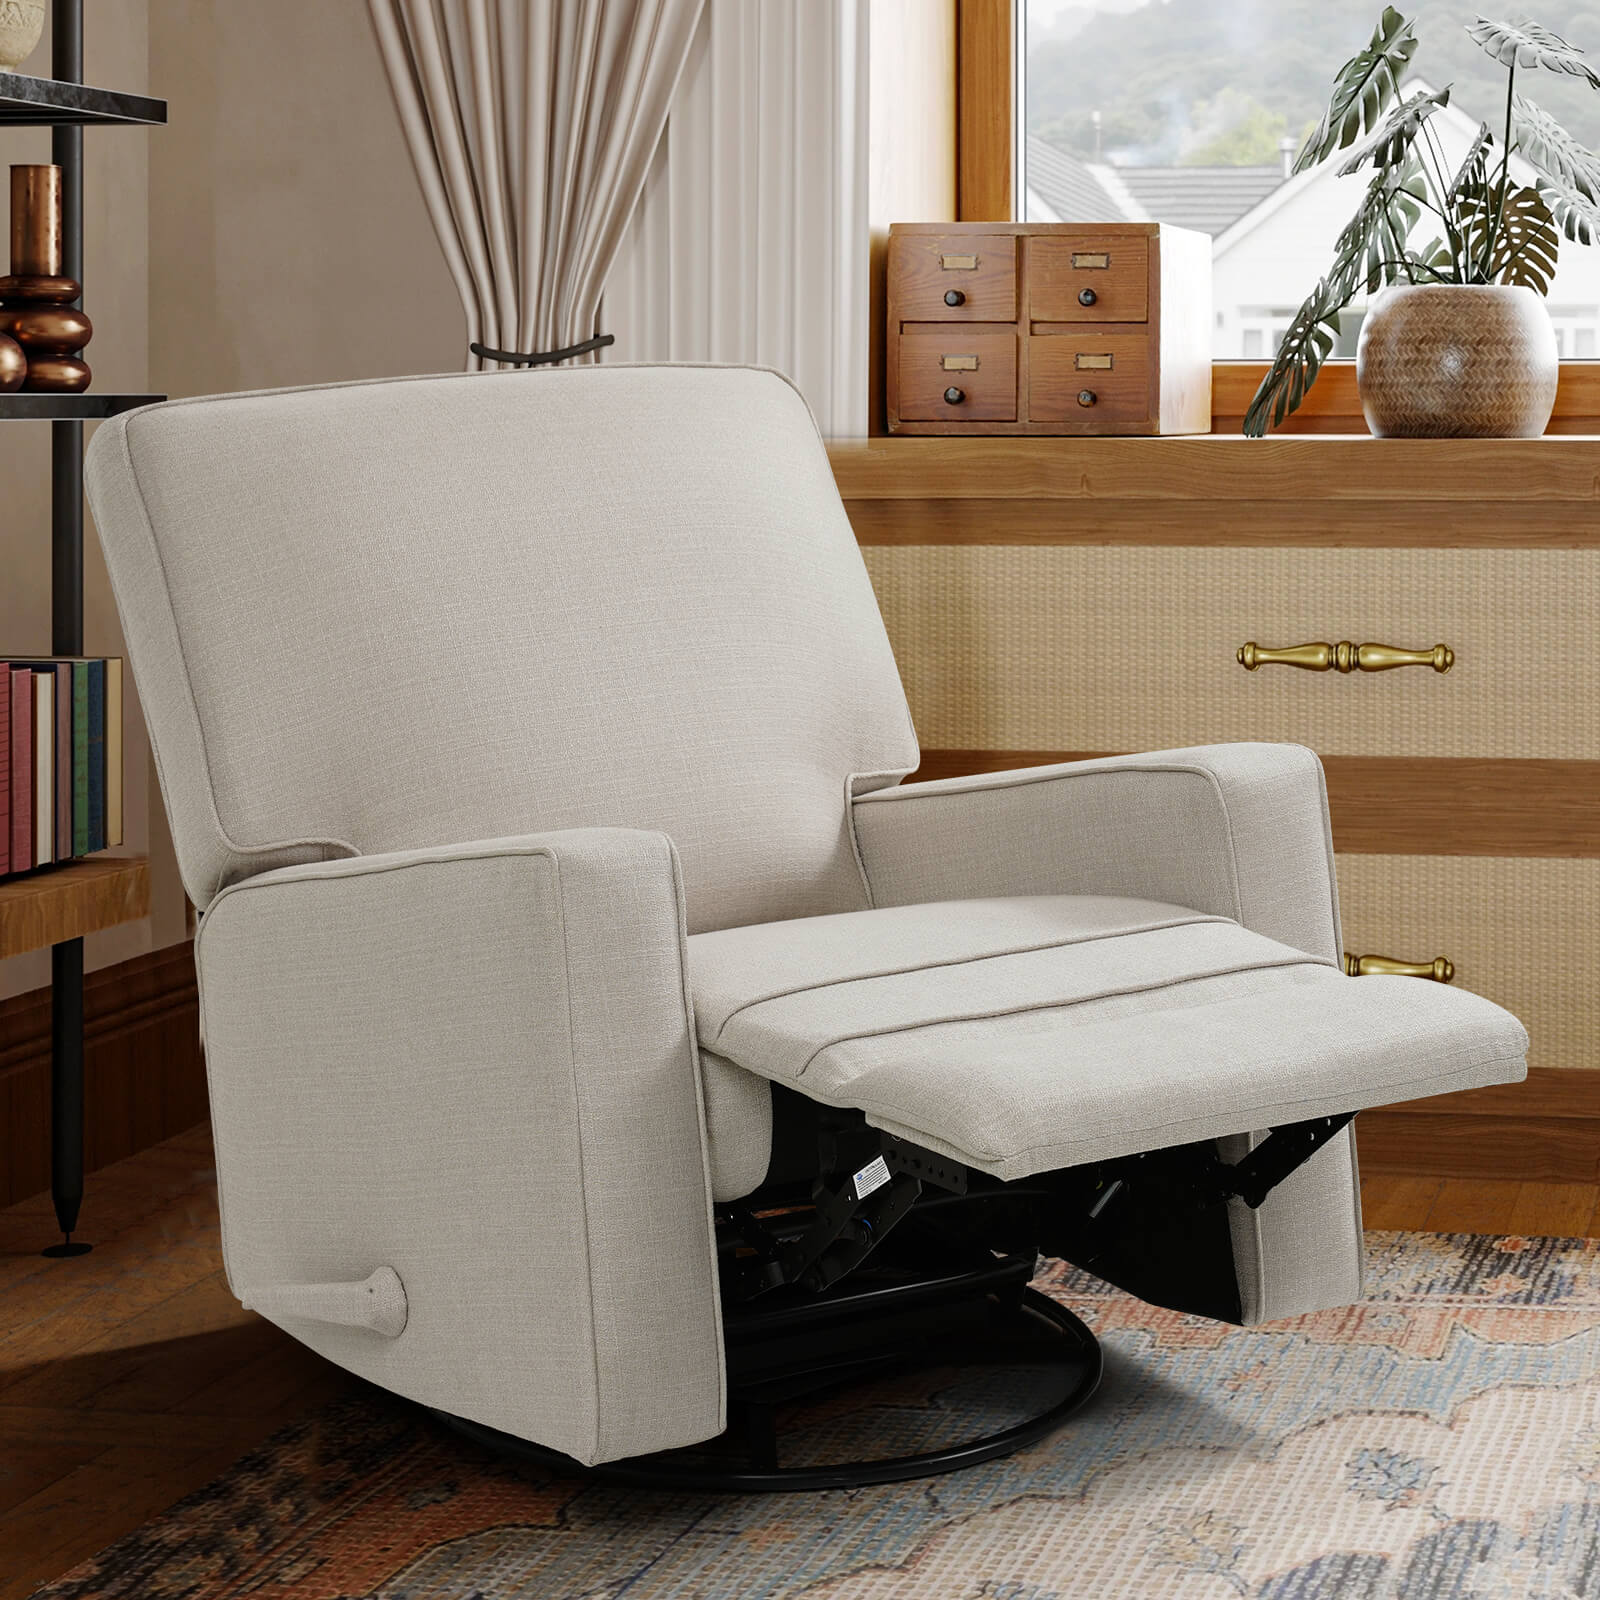 Soulout Swivel Glider Rocking Chair Manual Recliner, Fabric